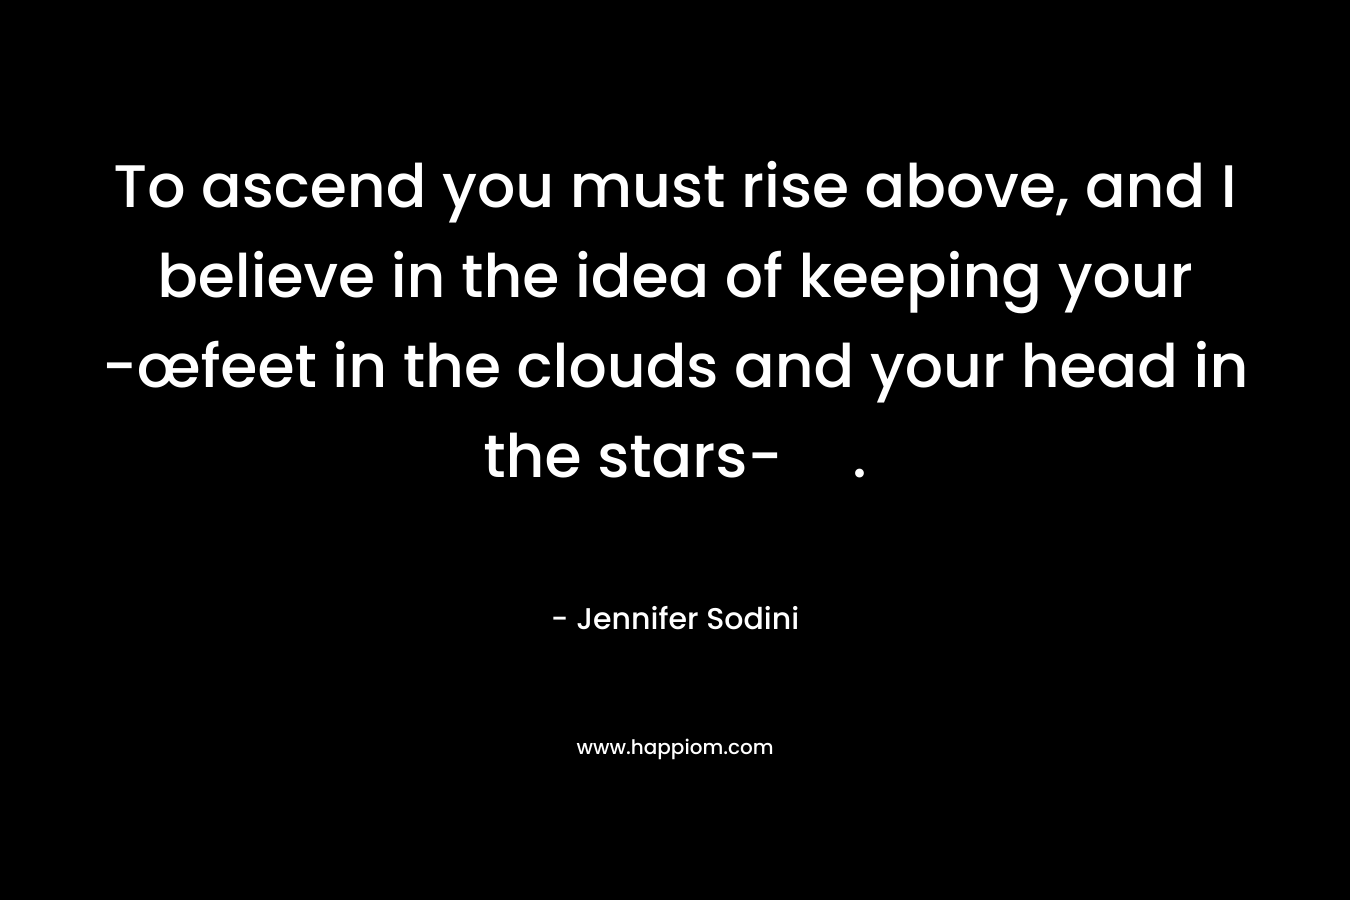 To ascend you must rise above, and I believe in the idea of keeping your -œfeet in the clouds and your head in the stars-. – Jennifer Sodini